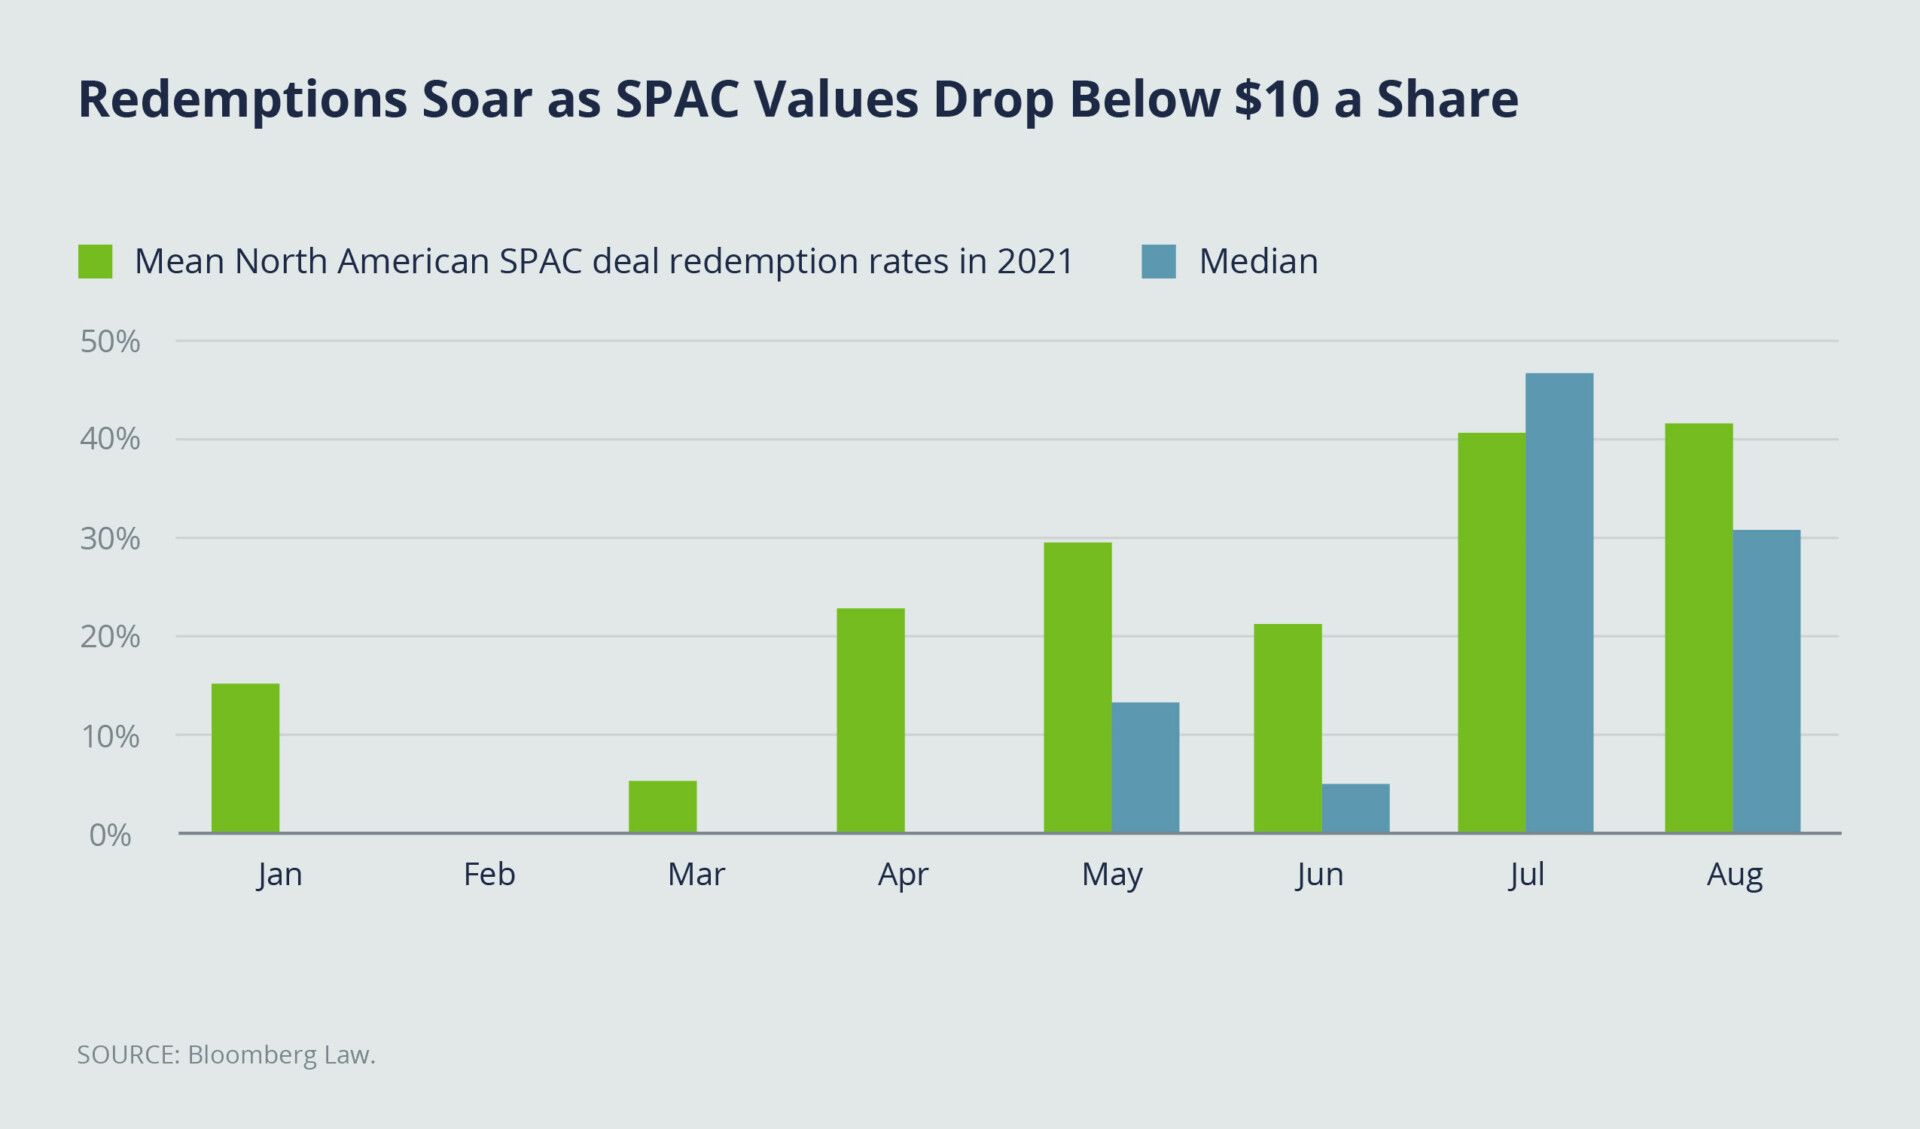 Redemptions Soar as SPAC Values Drop Below $10 a Share Graphic